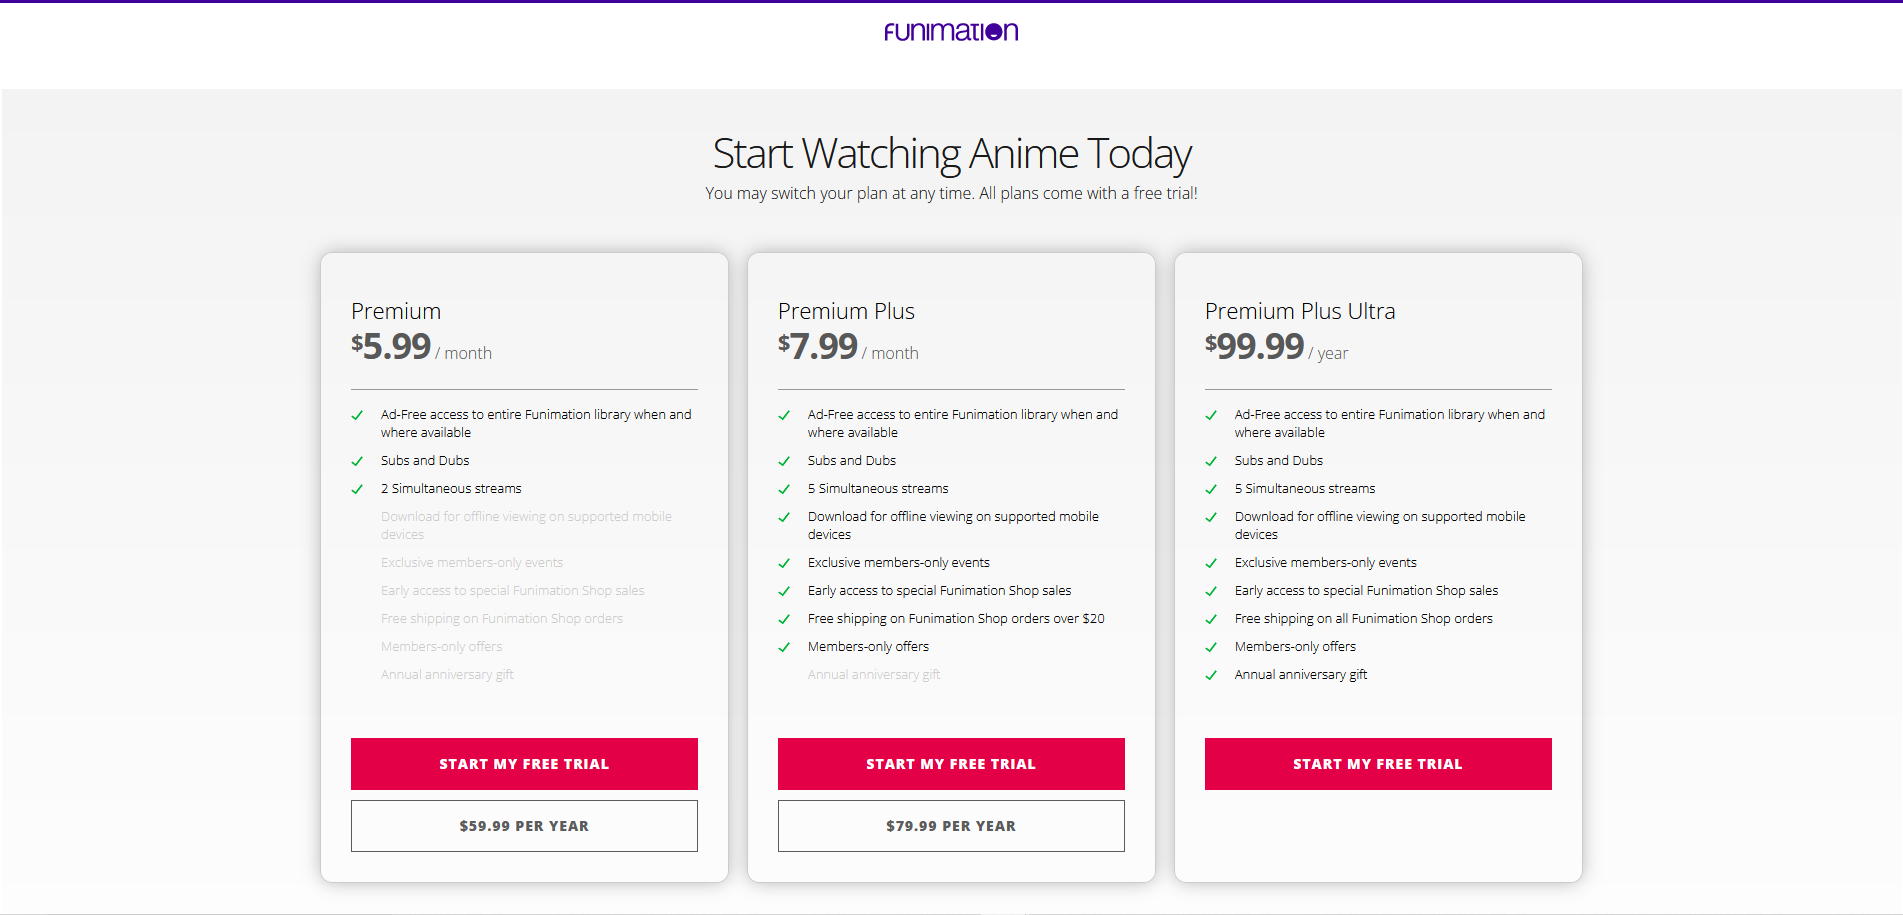 funimation subscription pricing page screenshot